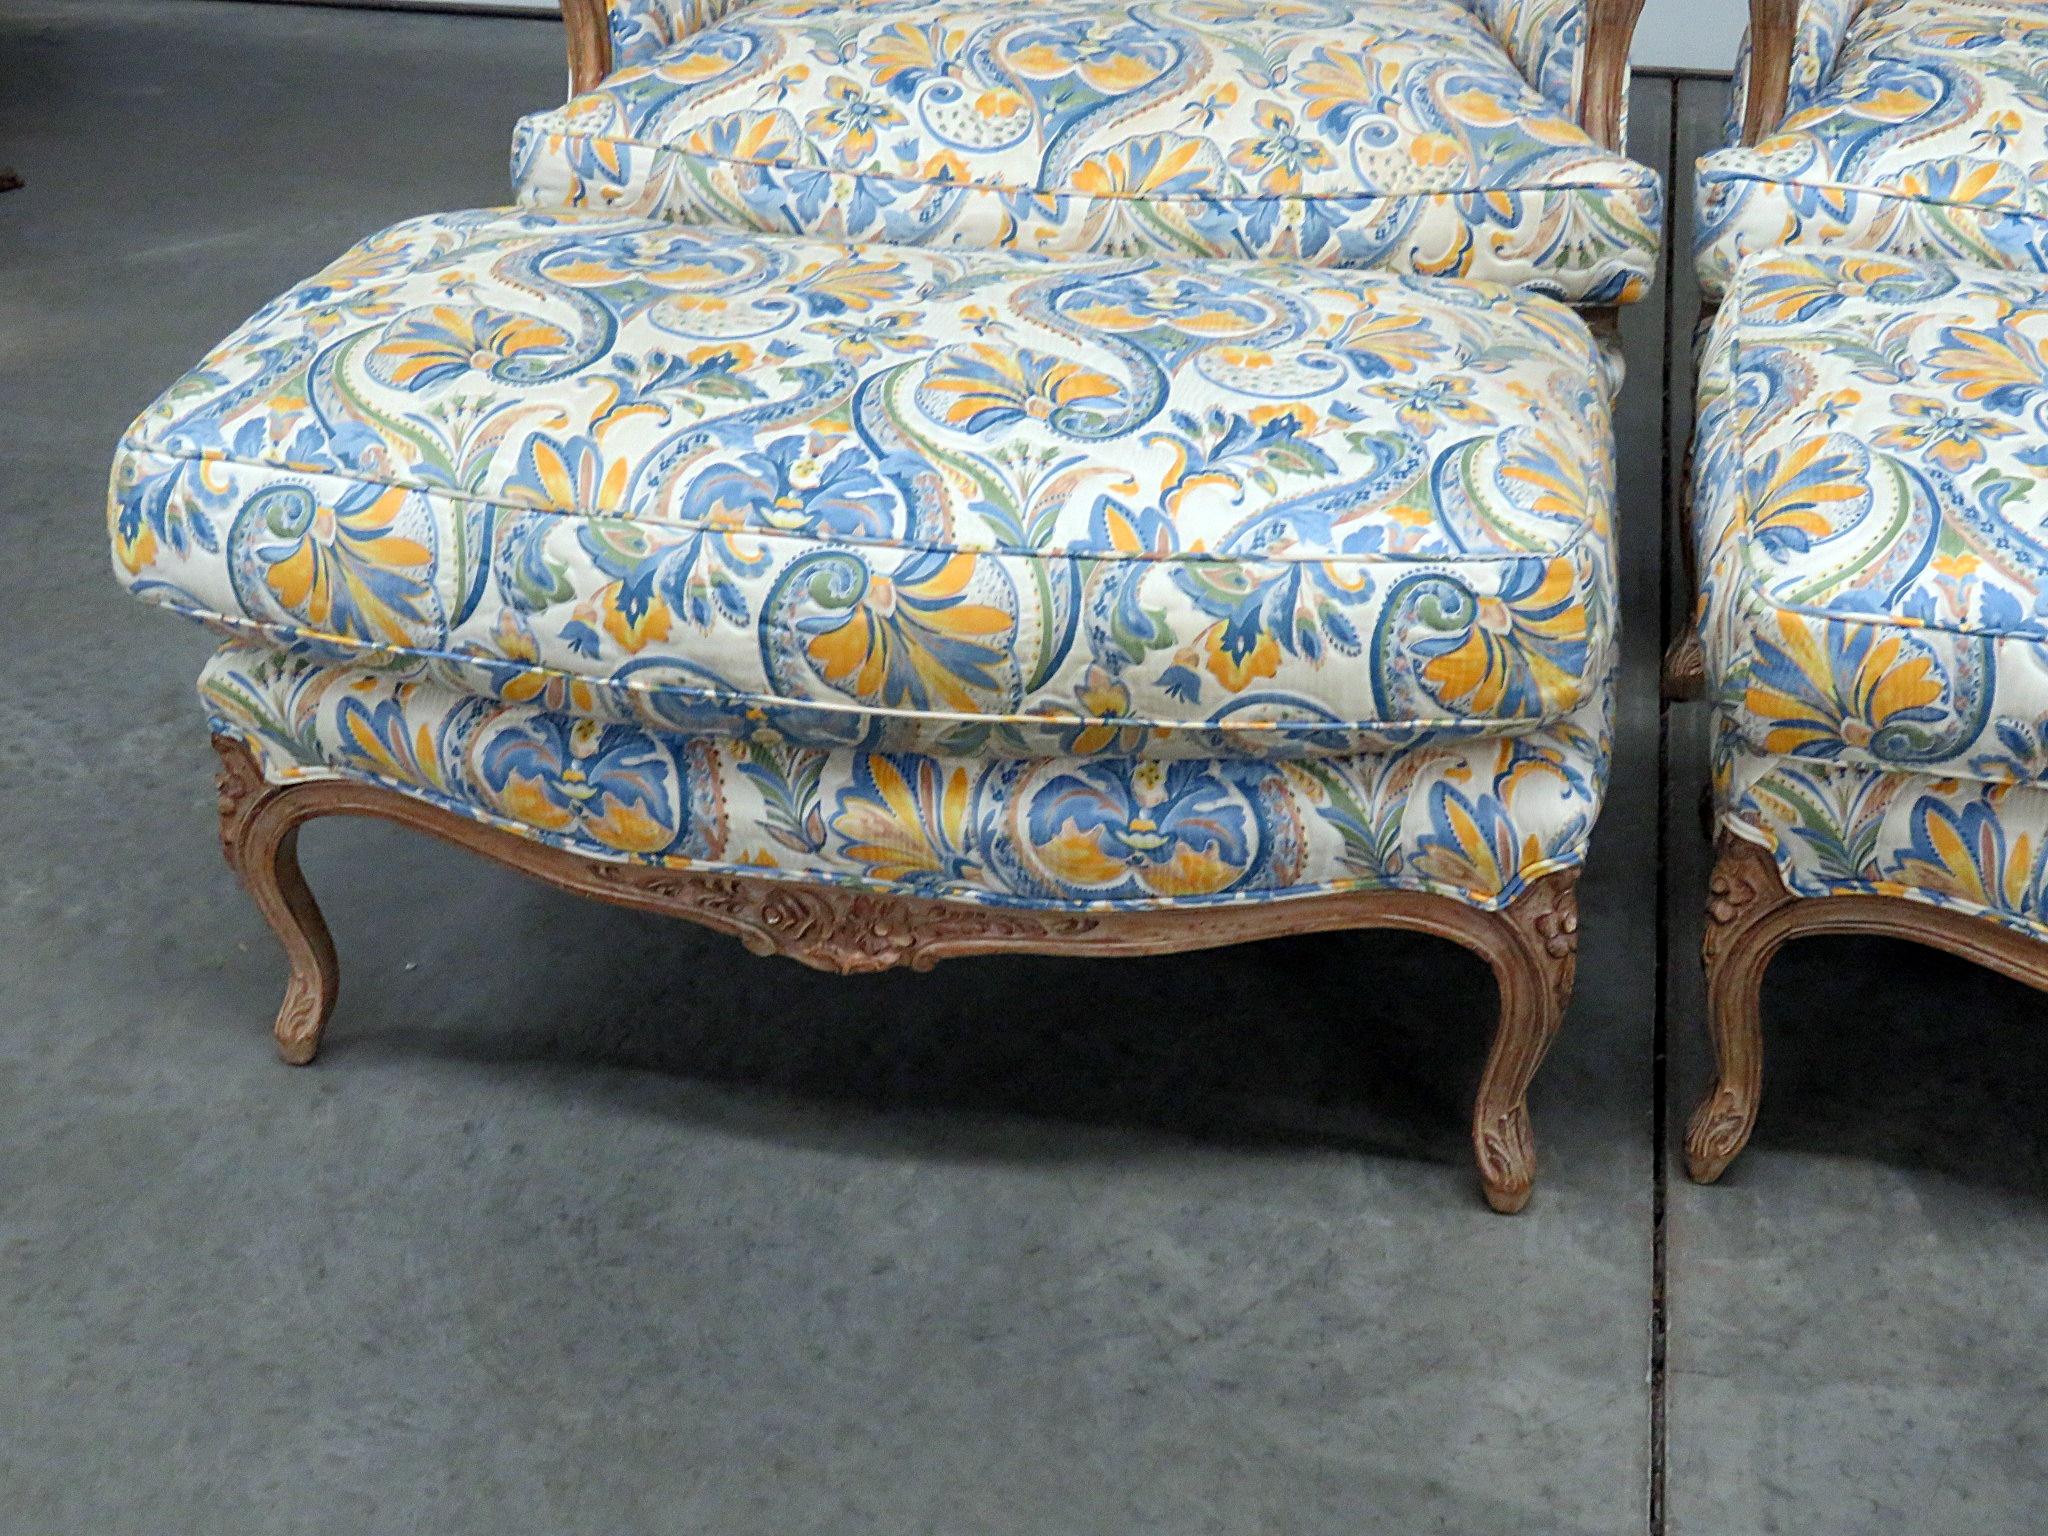 Pair of Country French style distressed finish wingback chairs and ottomans with textured upholstery. The chairs each measure 42